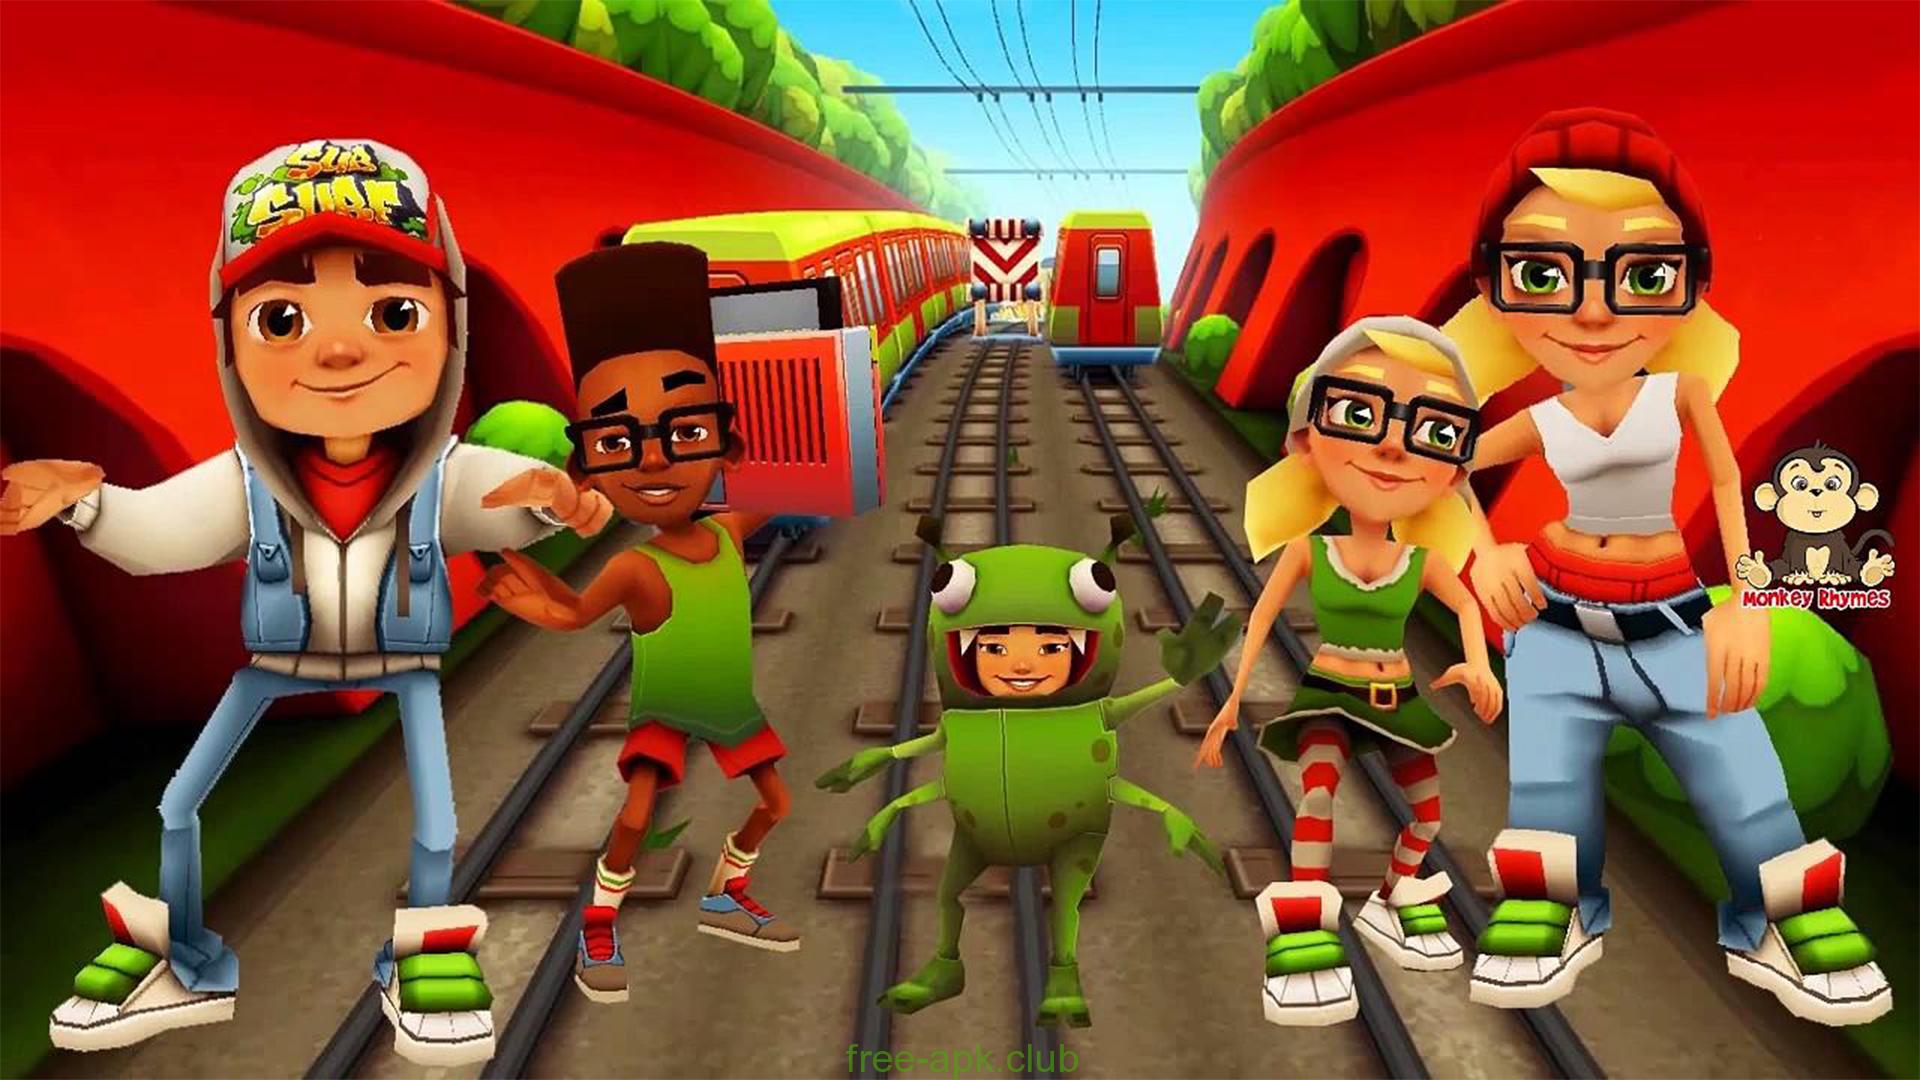 subway surfers game free download for pc windows 7 32-bit torrent